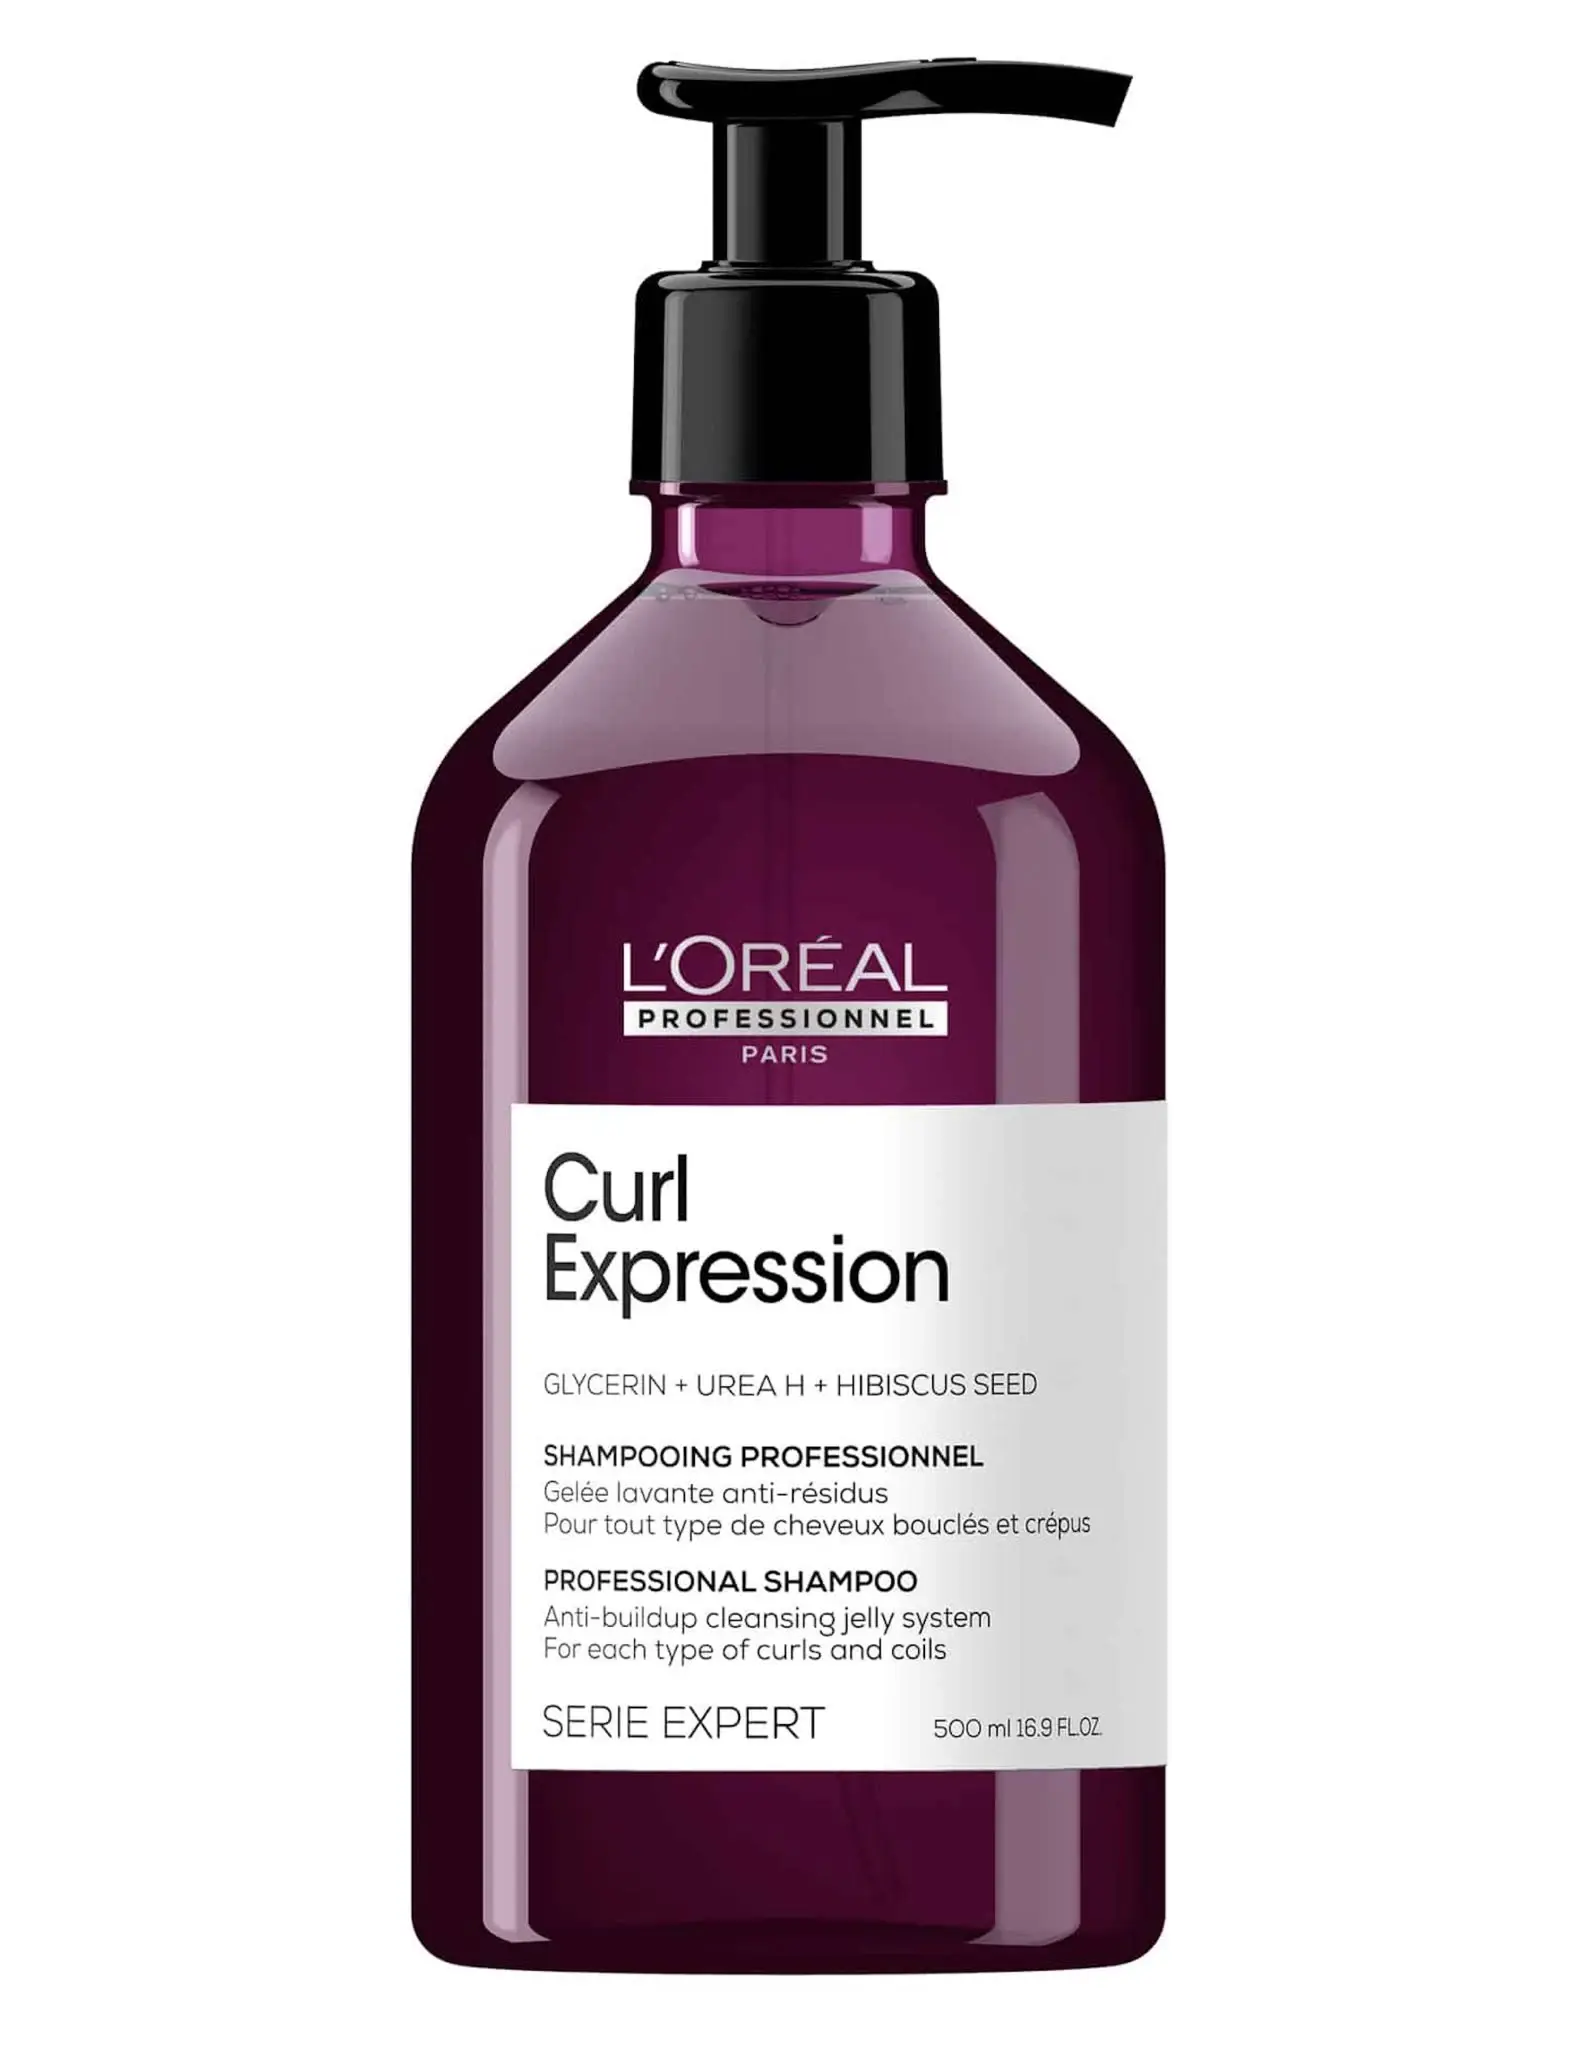 L'Oréal Professionnel - serie Expert Curl Expression Anti-Buildup Cleansing Jelly Shampoo 500ml